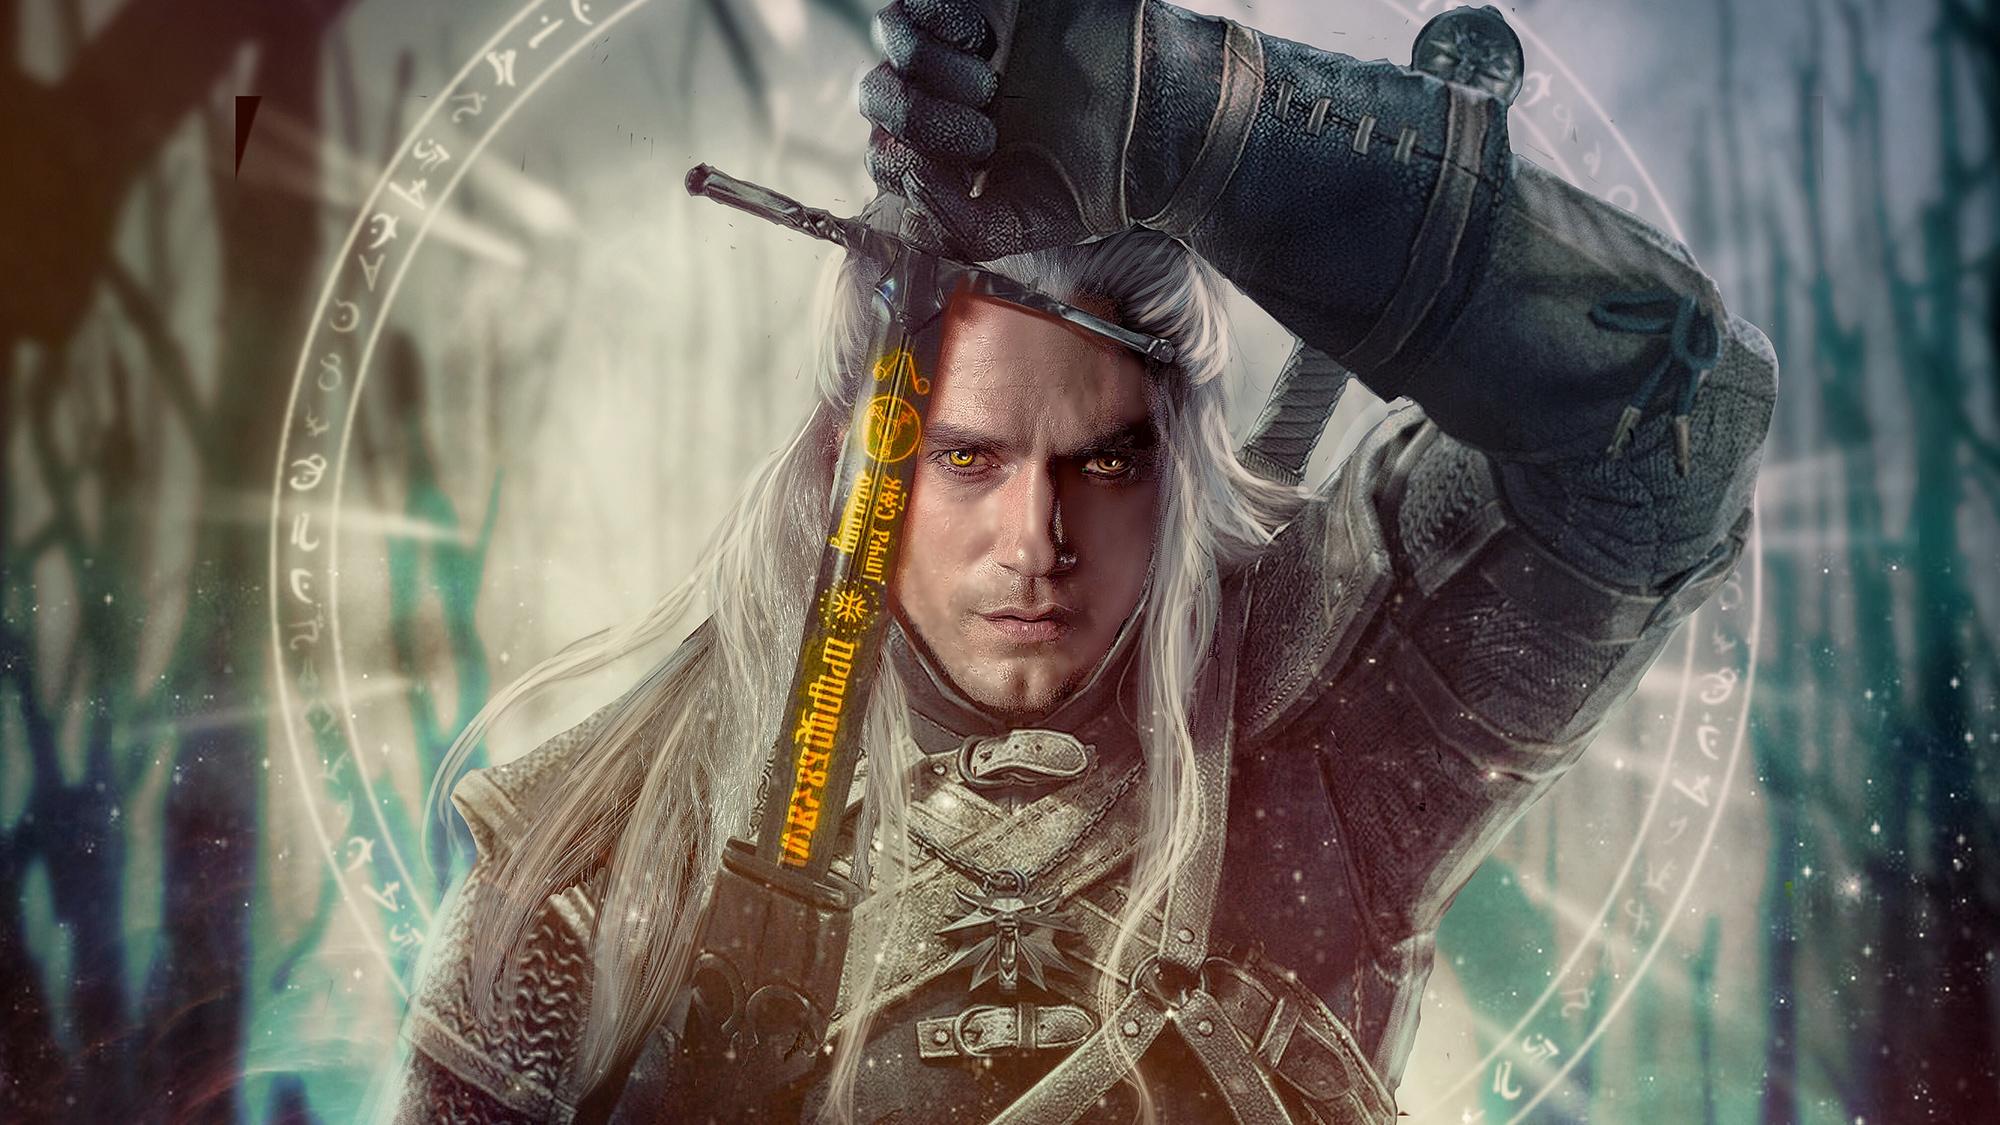 2000 x 1125 · jpeg - The Witcher Tv Series, HD Tv Shows, 4k Wallpapers, Images, Backgrounds ...